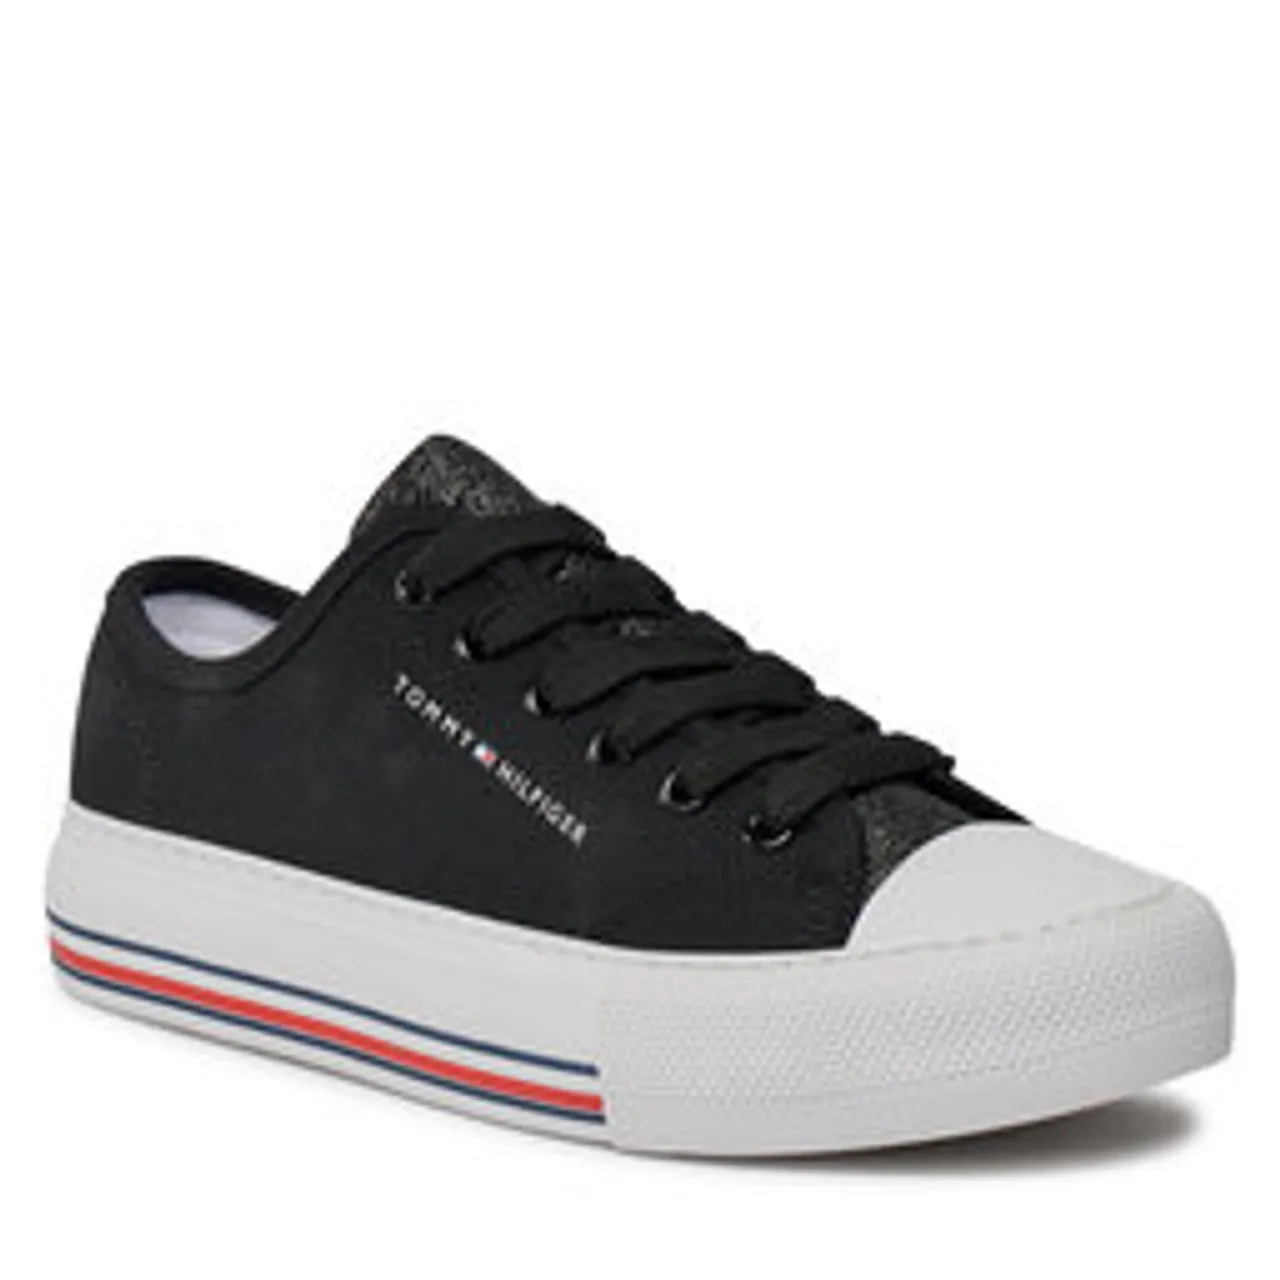 Sneakers aus Stoff Tommy Hilfiger Low Cut Lace-Up Sneaker T3A9-33185-1687 S Black 999